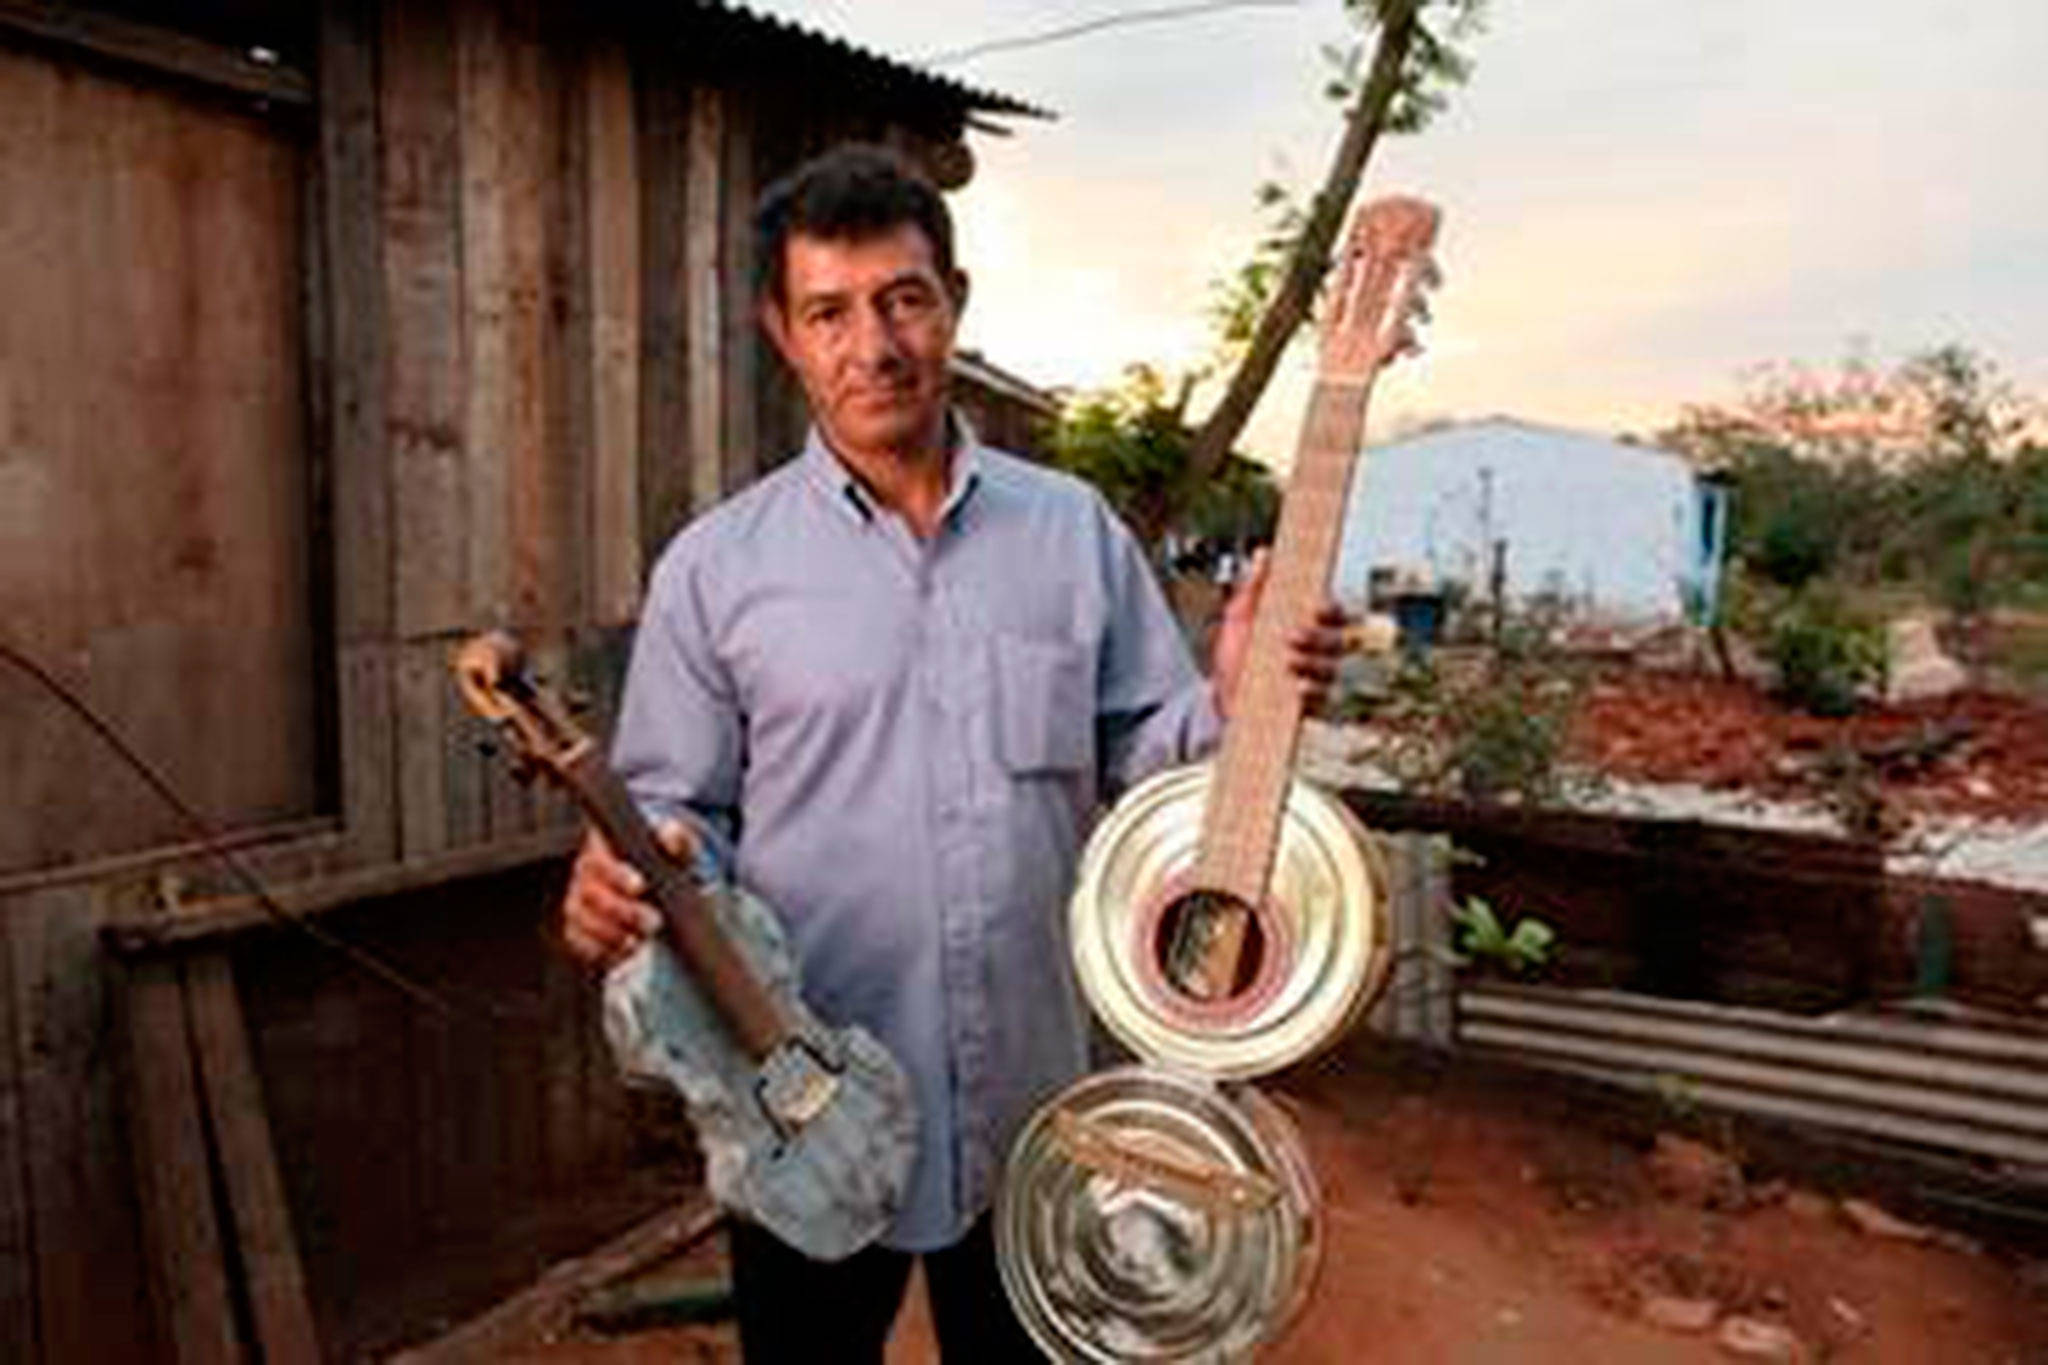 Nicolas “Cola” Gomez from the Recycled Orchestra of Cateura showcases hand-made instruments featured in the documentary “Landfill Harmonic” which will be shown at the Sequim Library at 6 p.m. Tuesday, July 25. Submitted photo